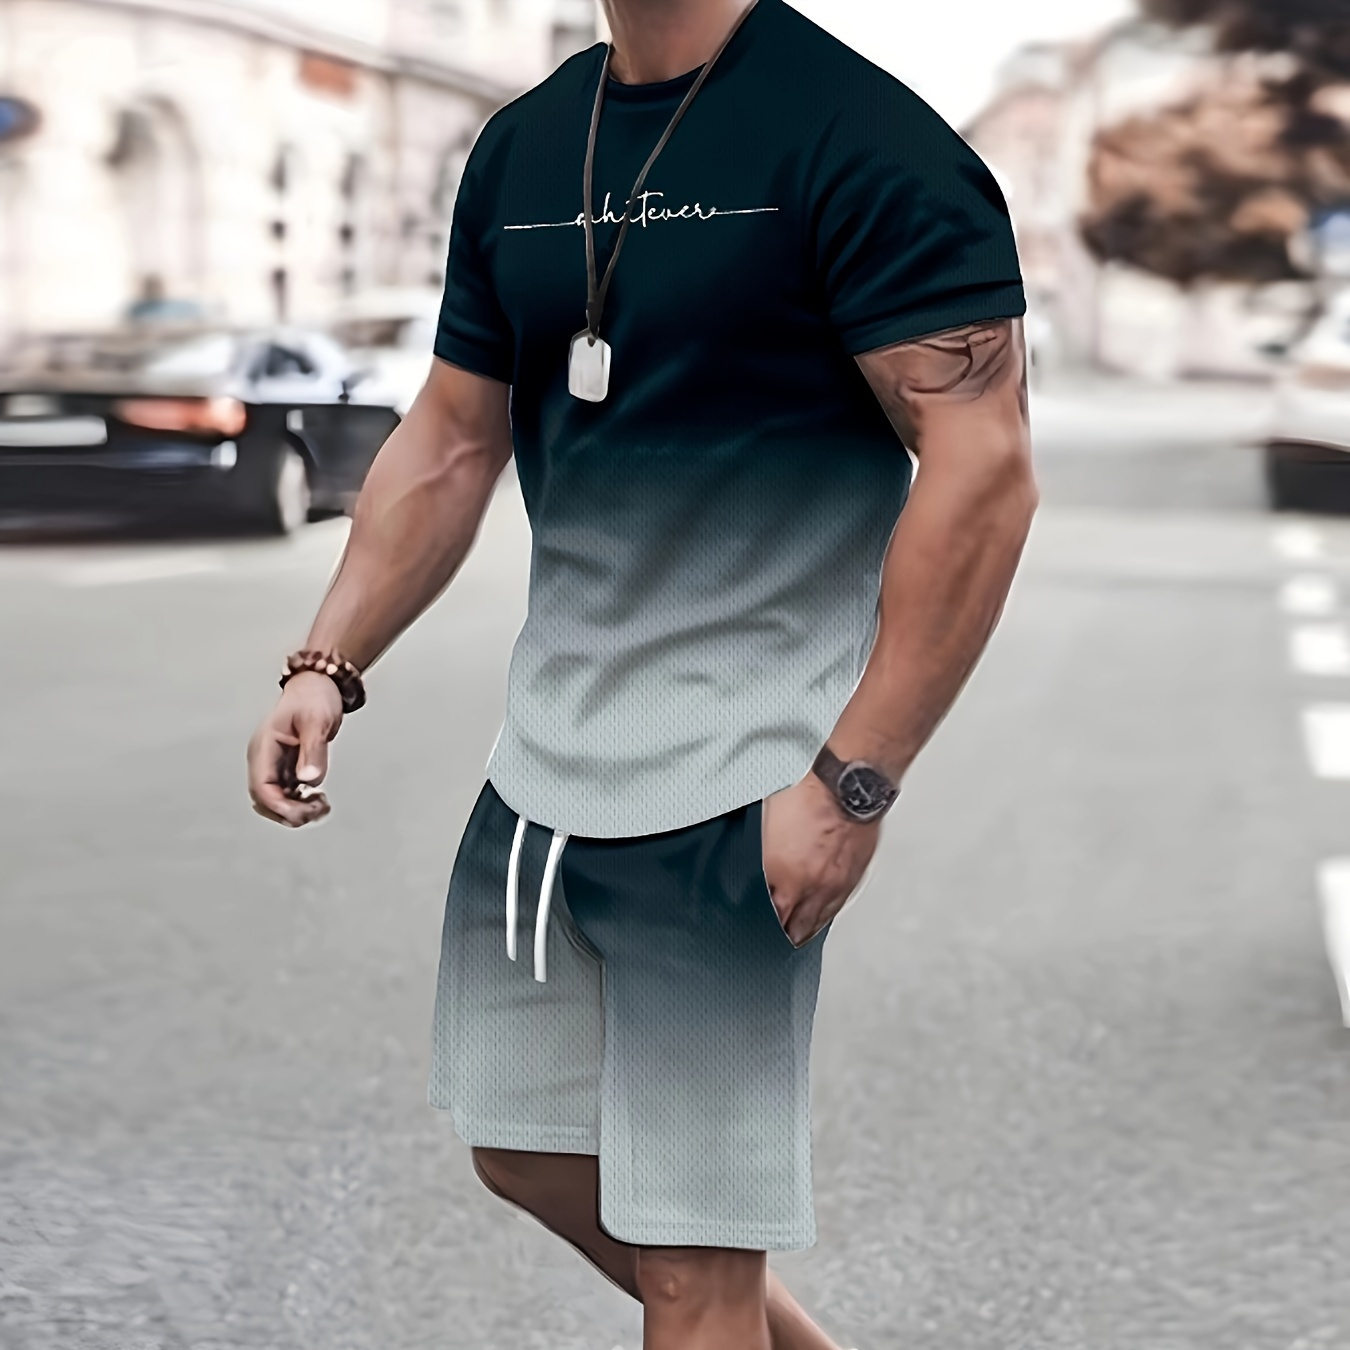 

Men's 2pcs Casual Set Of Gradient Color Outfits, Letter Print "whatever" Crew Neck Short Sleeve T-shirt And Shorts, Chic And Comfy For Summer Daily Outerwear